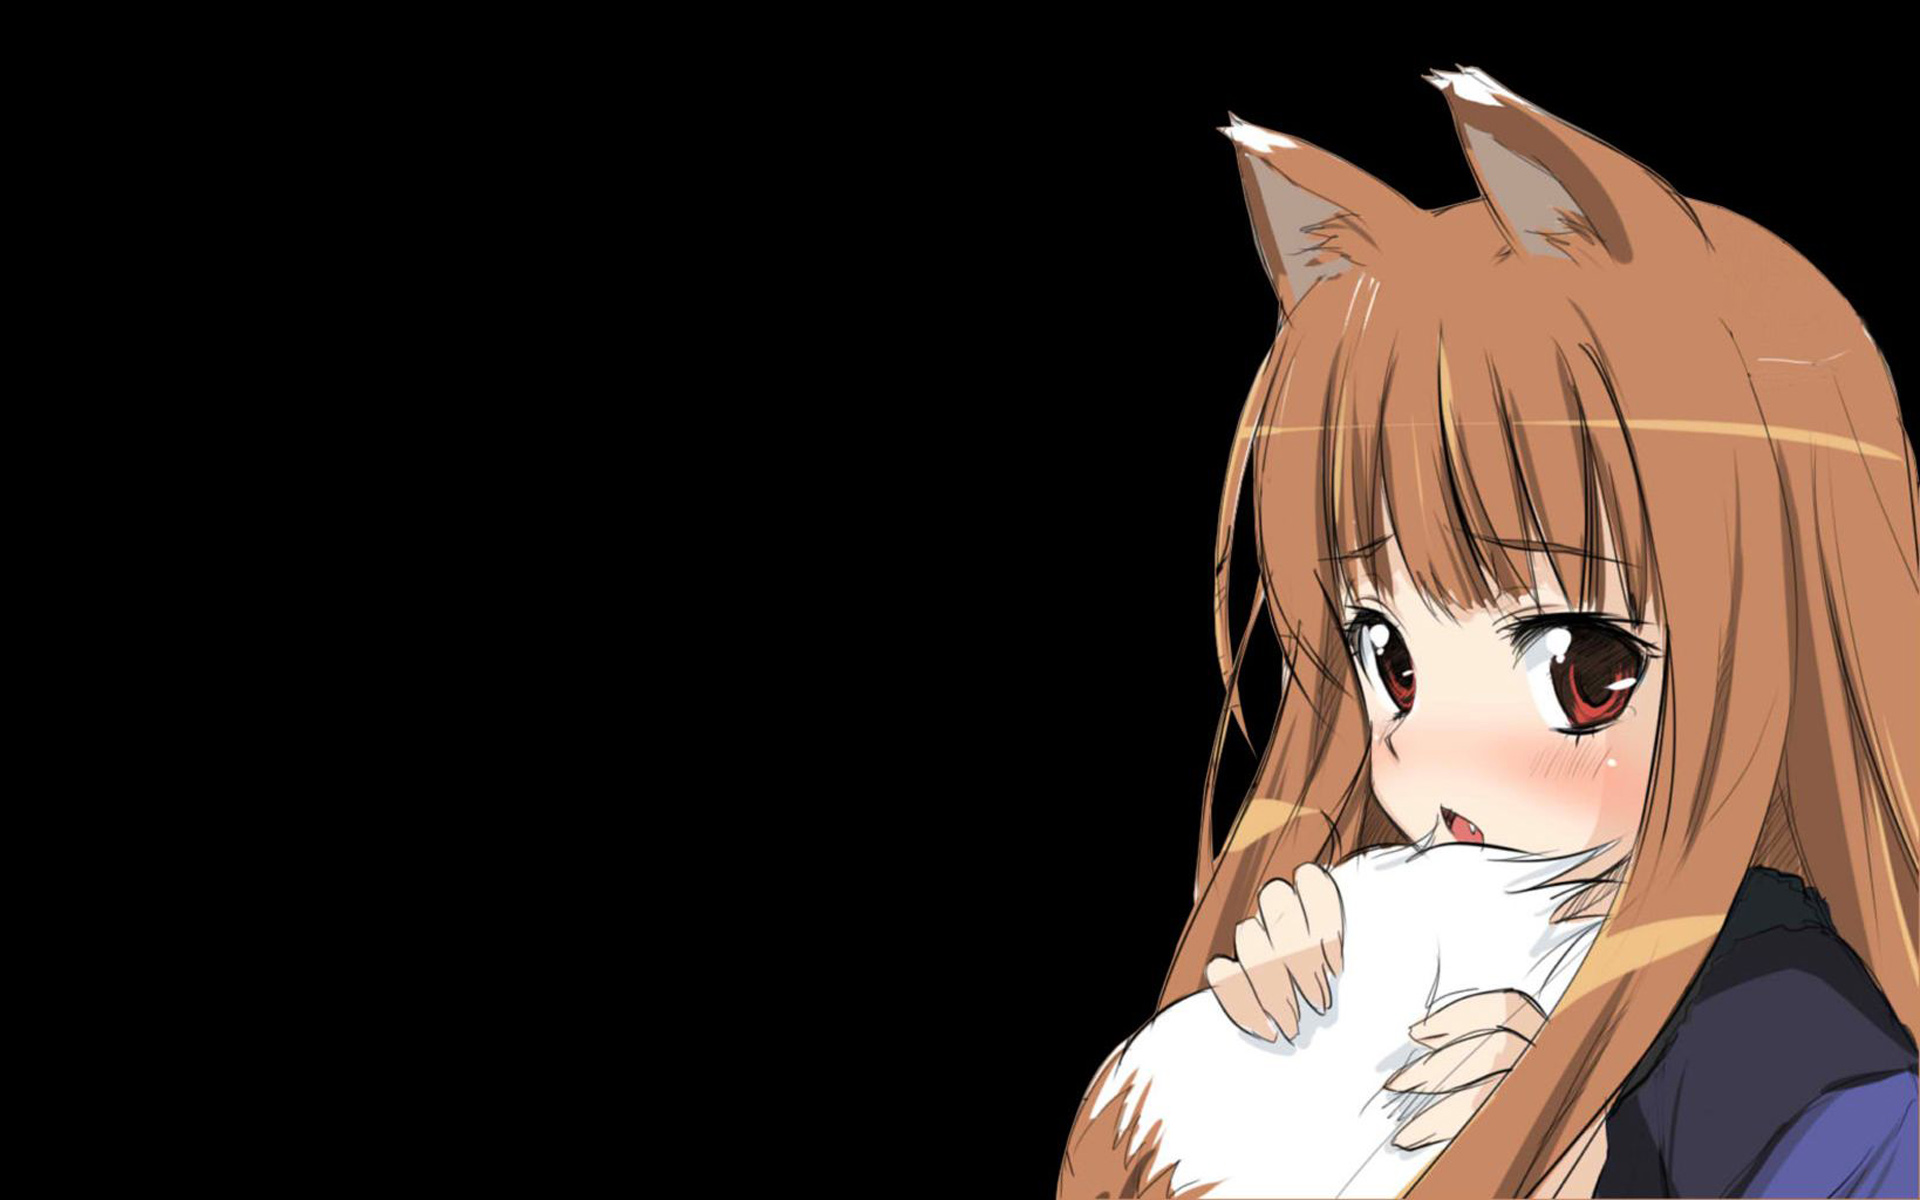 Holo (Spice & Wolf) standing in a serene field with a sunset sky.